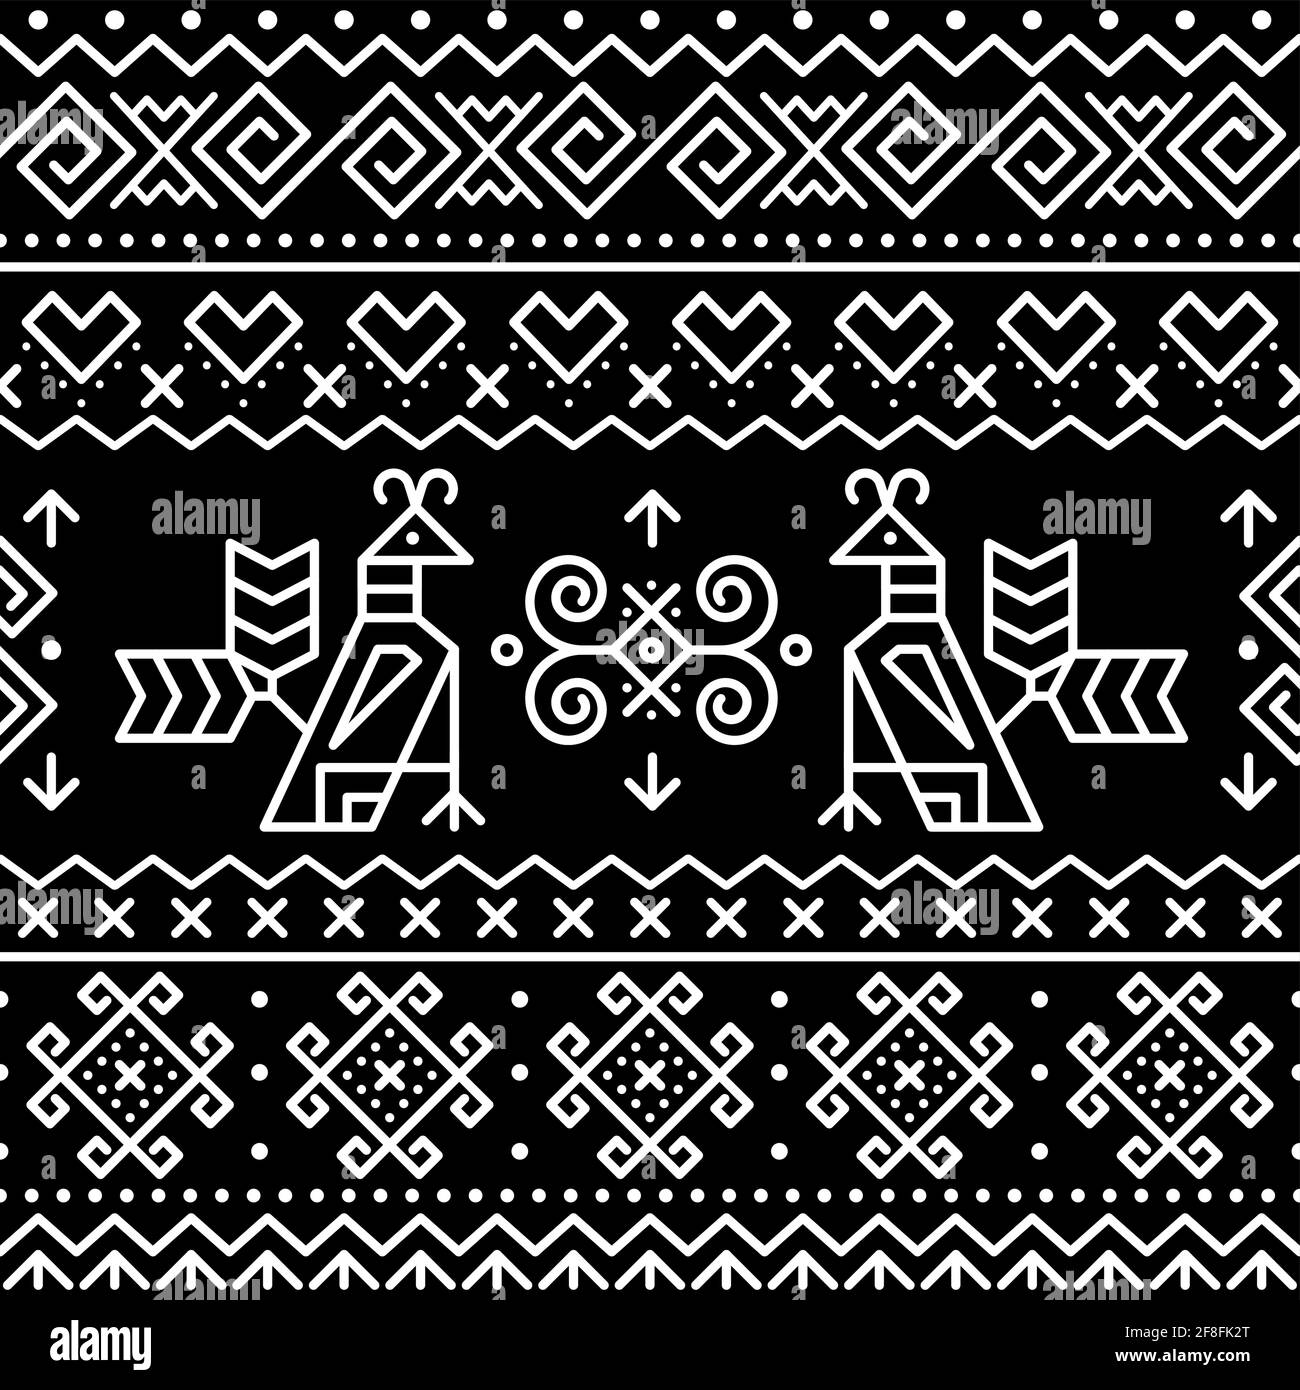 Slovak traditional folk art vector seamless geometric pattern with brids swirls, zig-zag shapes inspired by traditional painted art from Cicmany Stock Vector